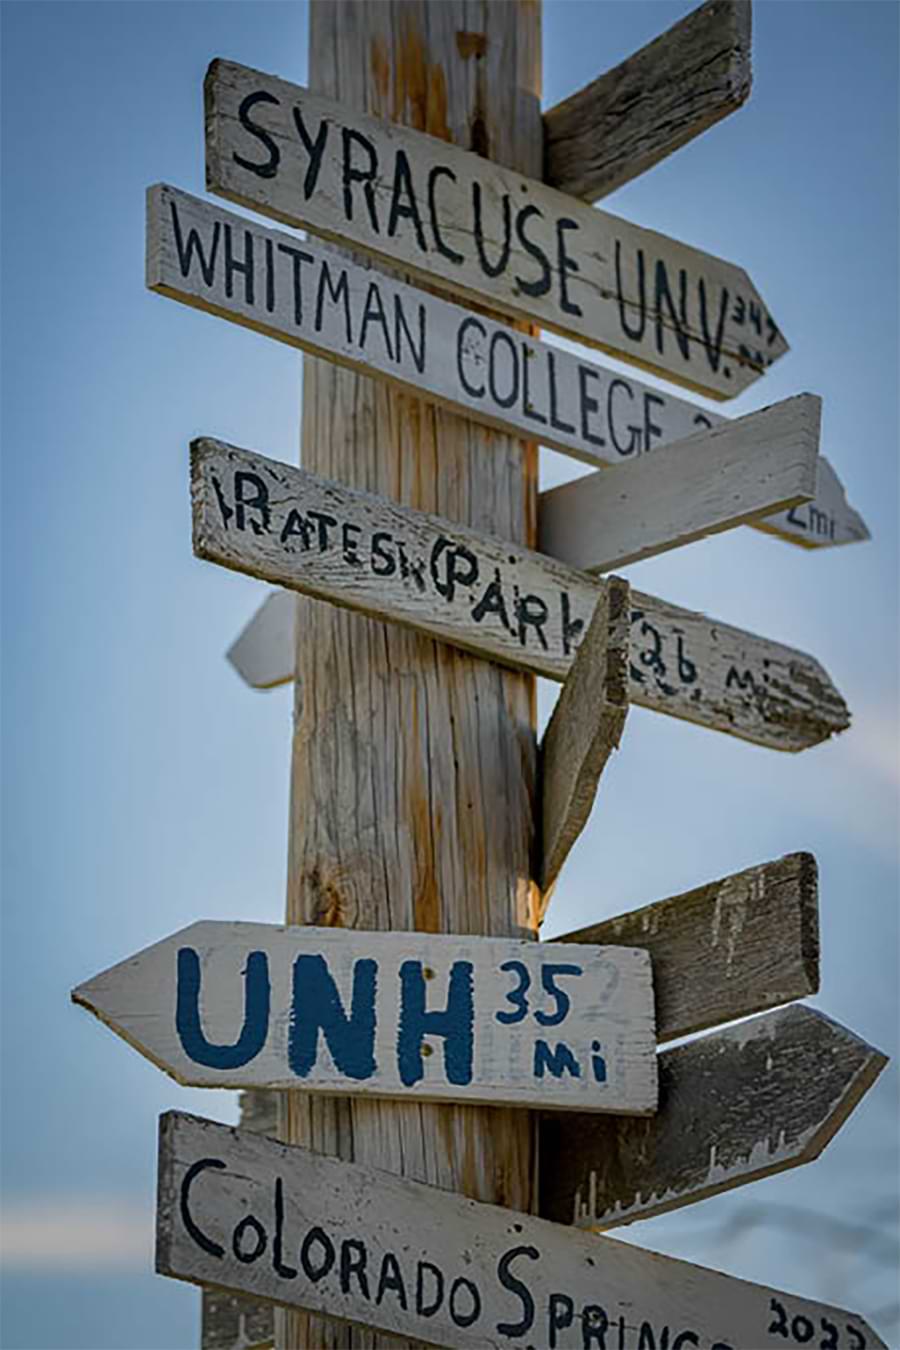 Signage at Apple Hill Orchard in Concord includes UNH in its list of destinations.